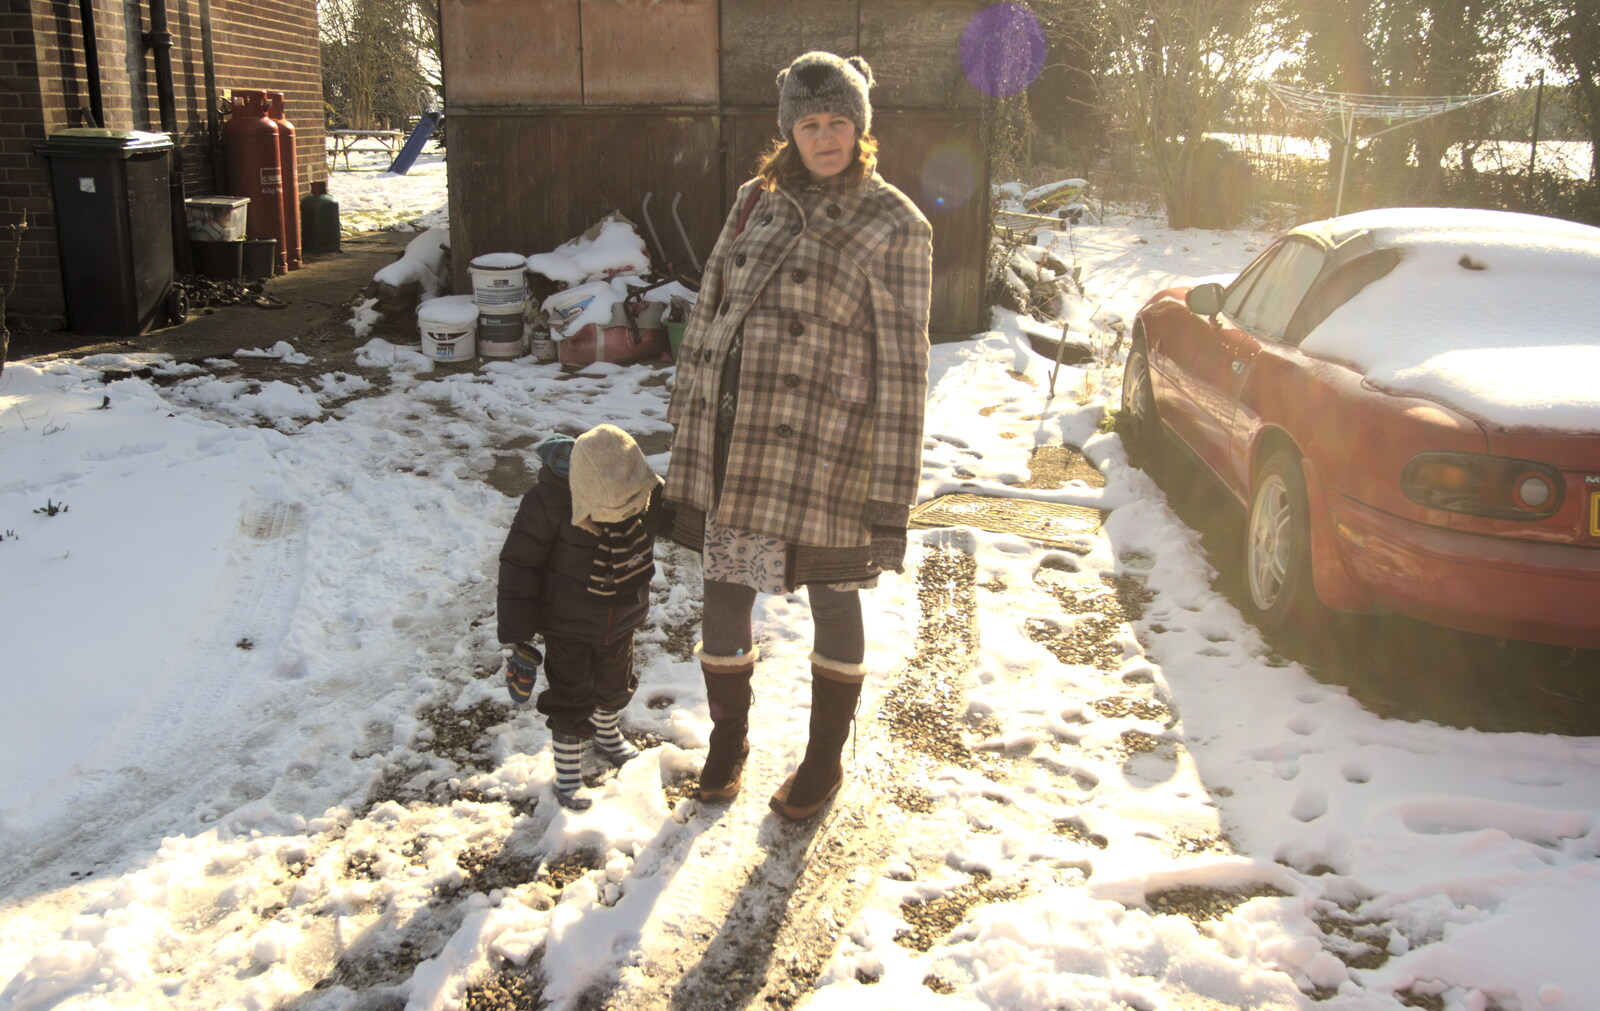 Fred and Isobel in front of the asbestos garage from A Snowy February Miscellany, Suffolk - 7th February 2012